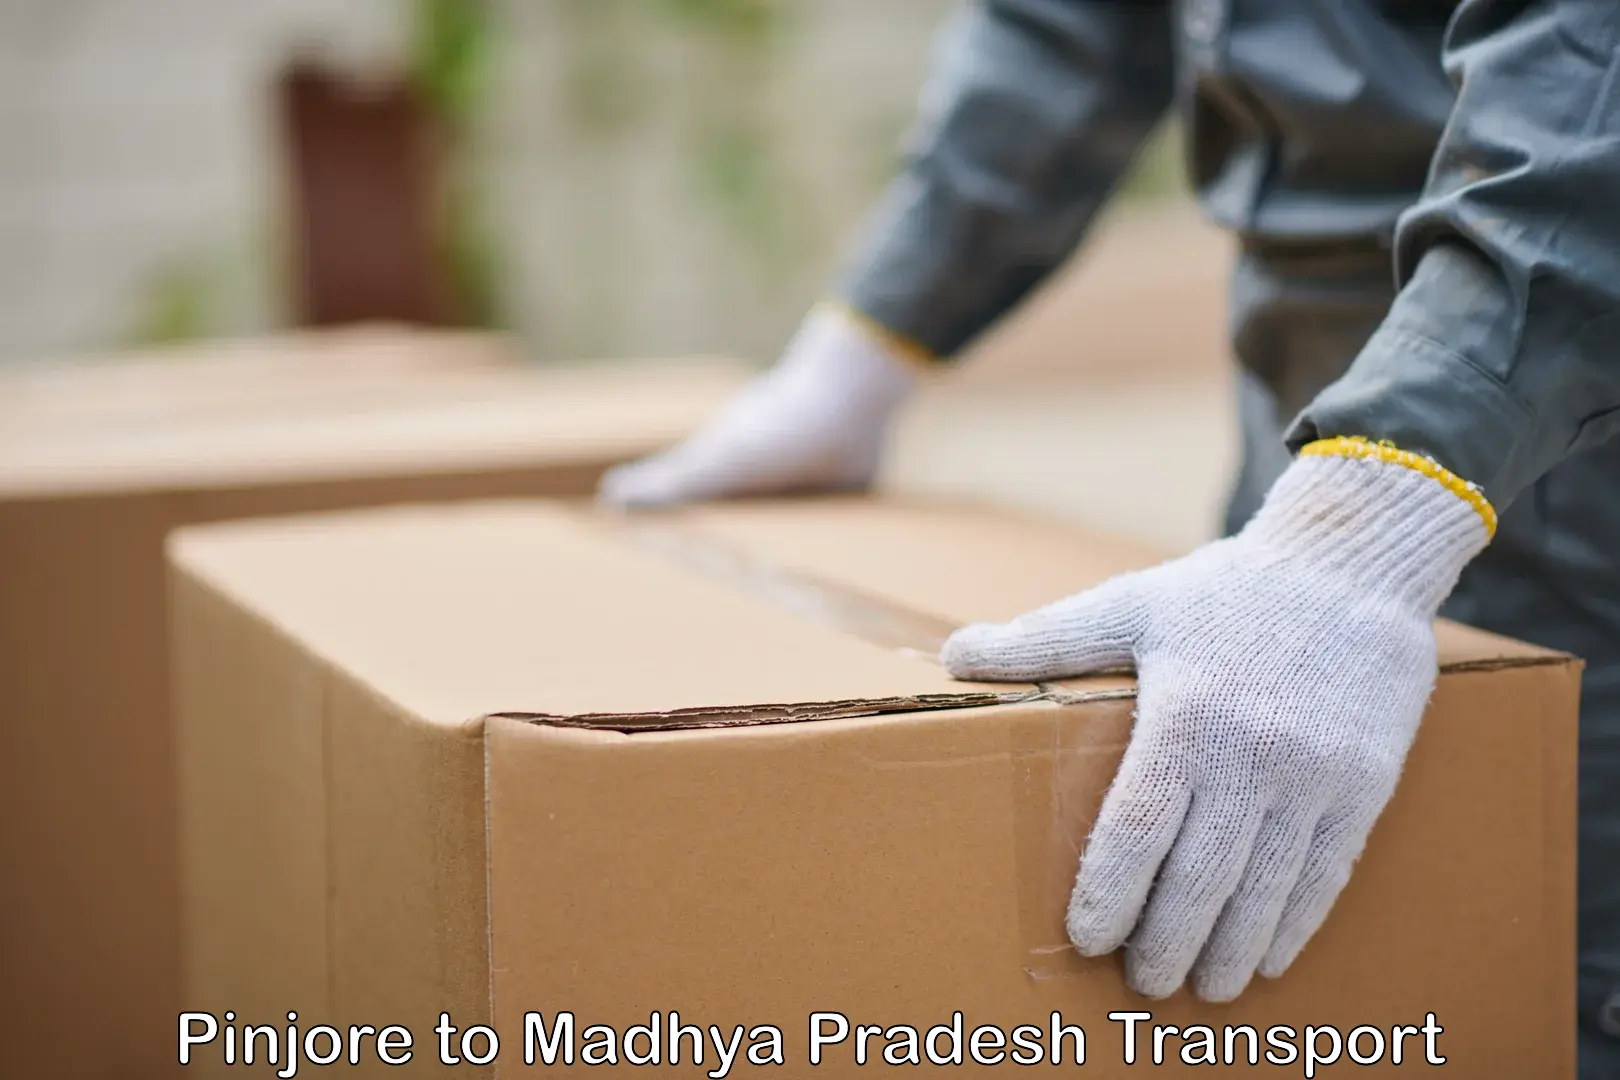 Express transport services in Pinjore to Chhindwara